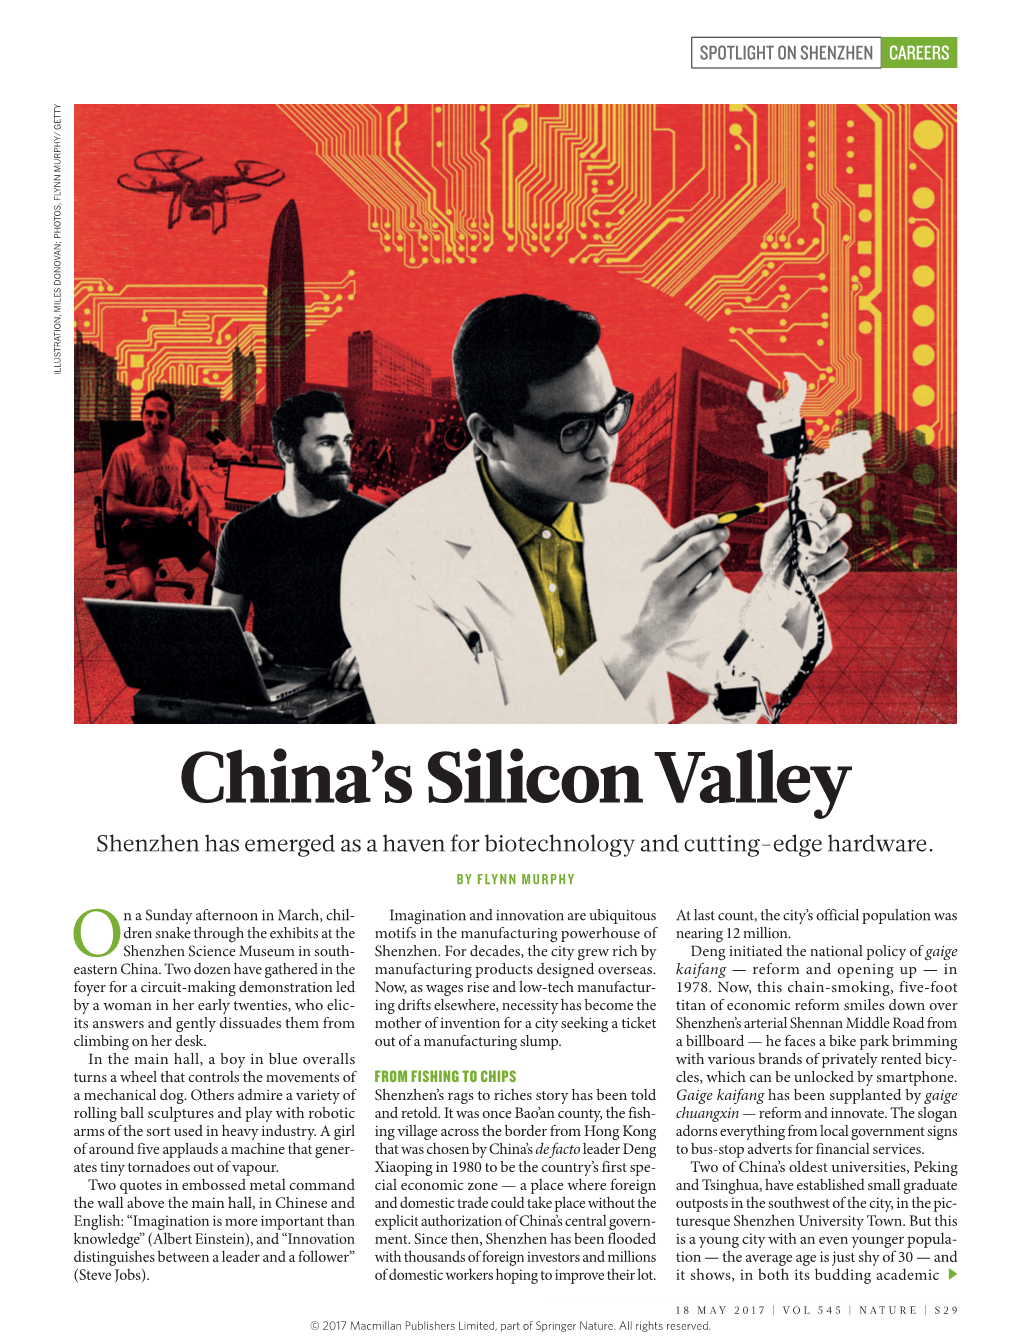 China's Silicon Valley